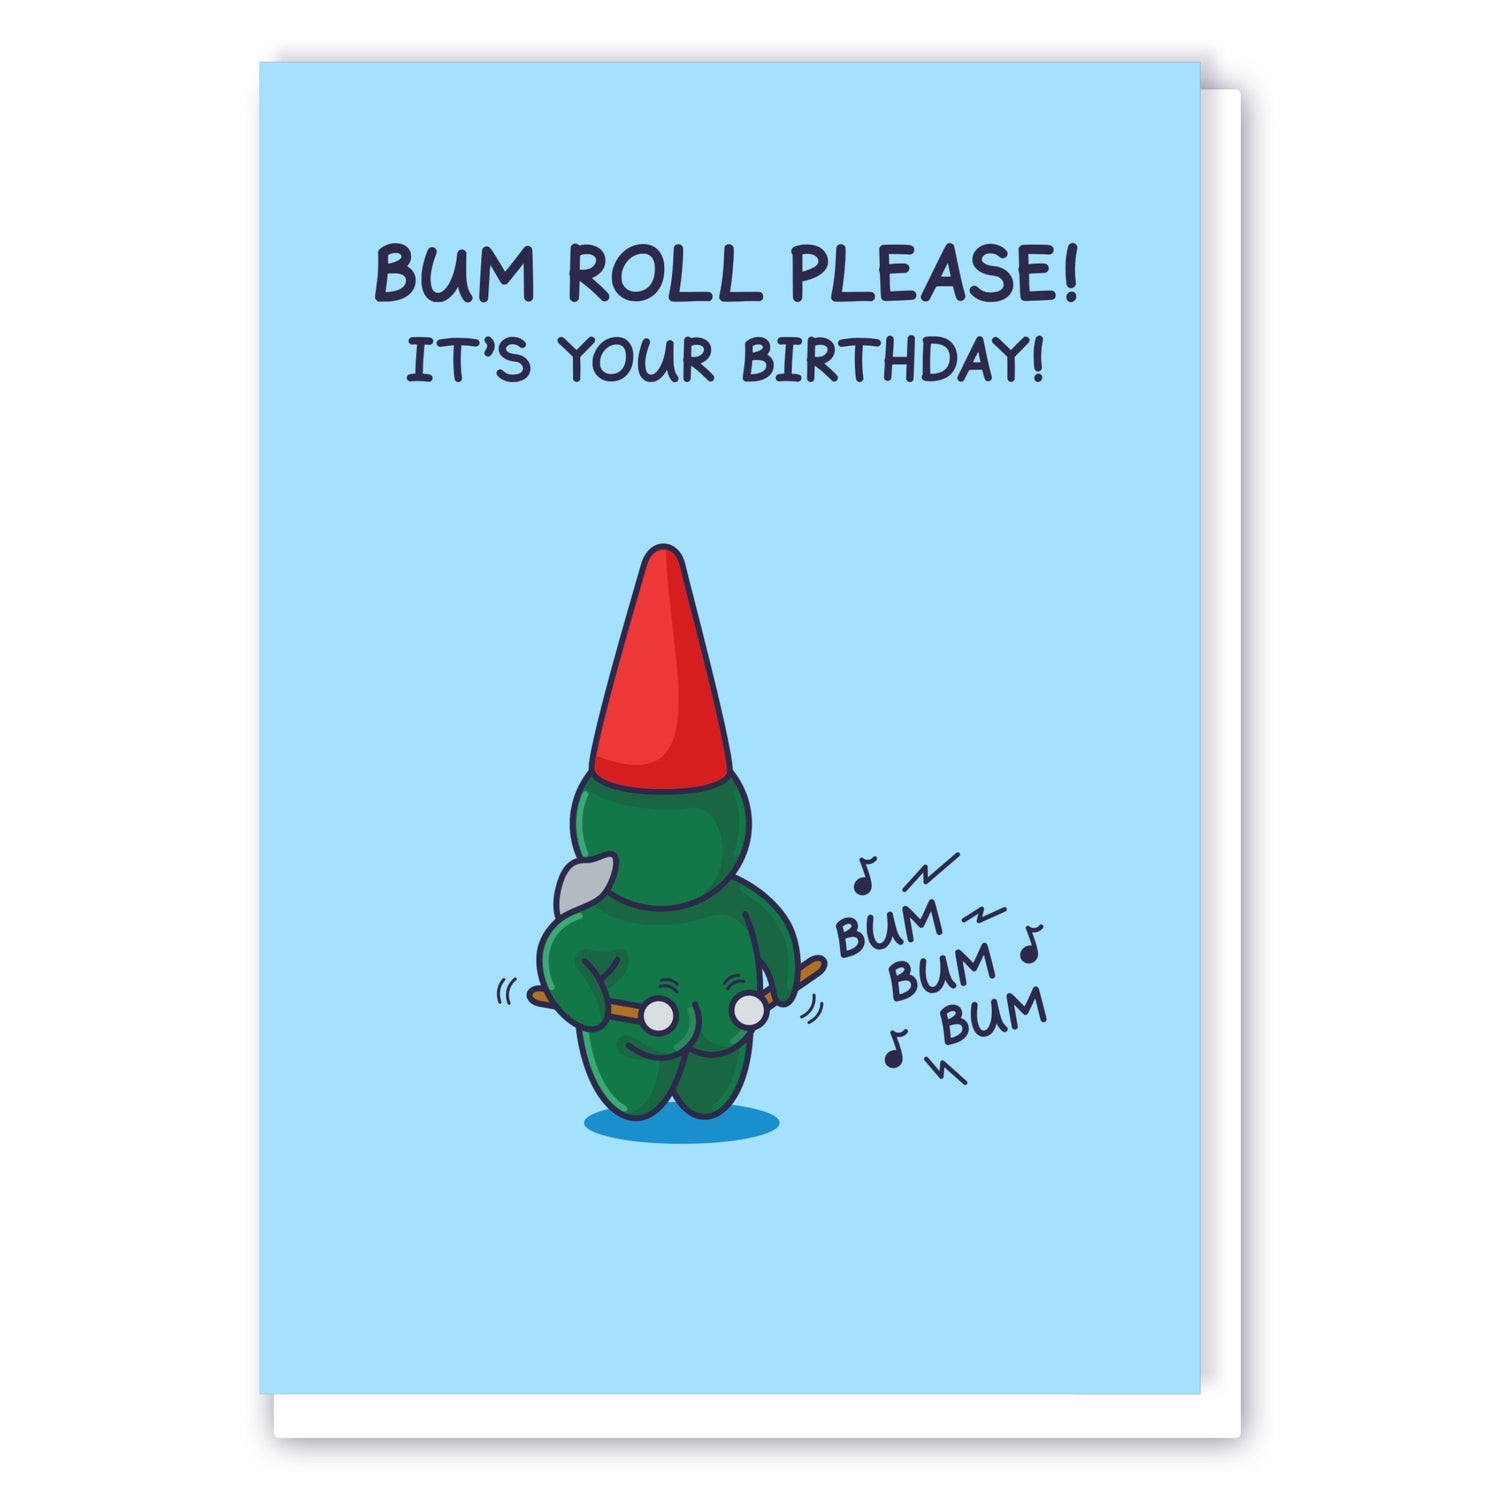 A cute gnome is playing the drums on his cheeky bottom. The funny greeting card caption reads 'Bum Roll Please! It's Your Birthday!'